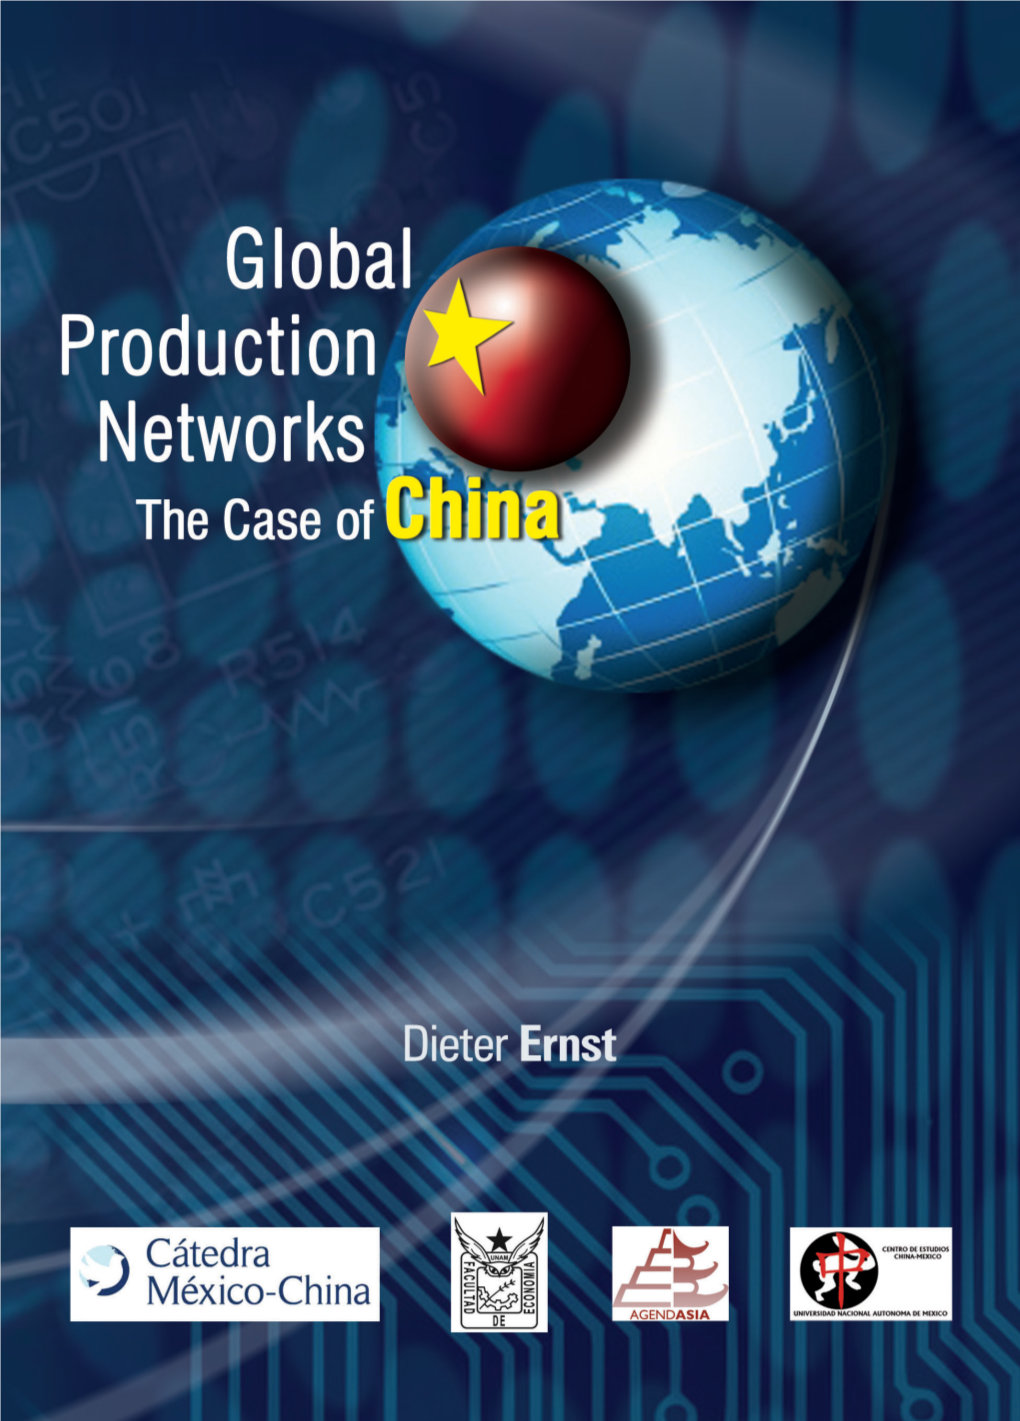 Gobal Production Networks Economic Development. the Case of China